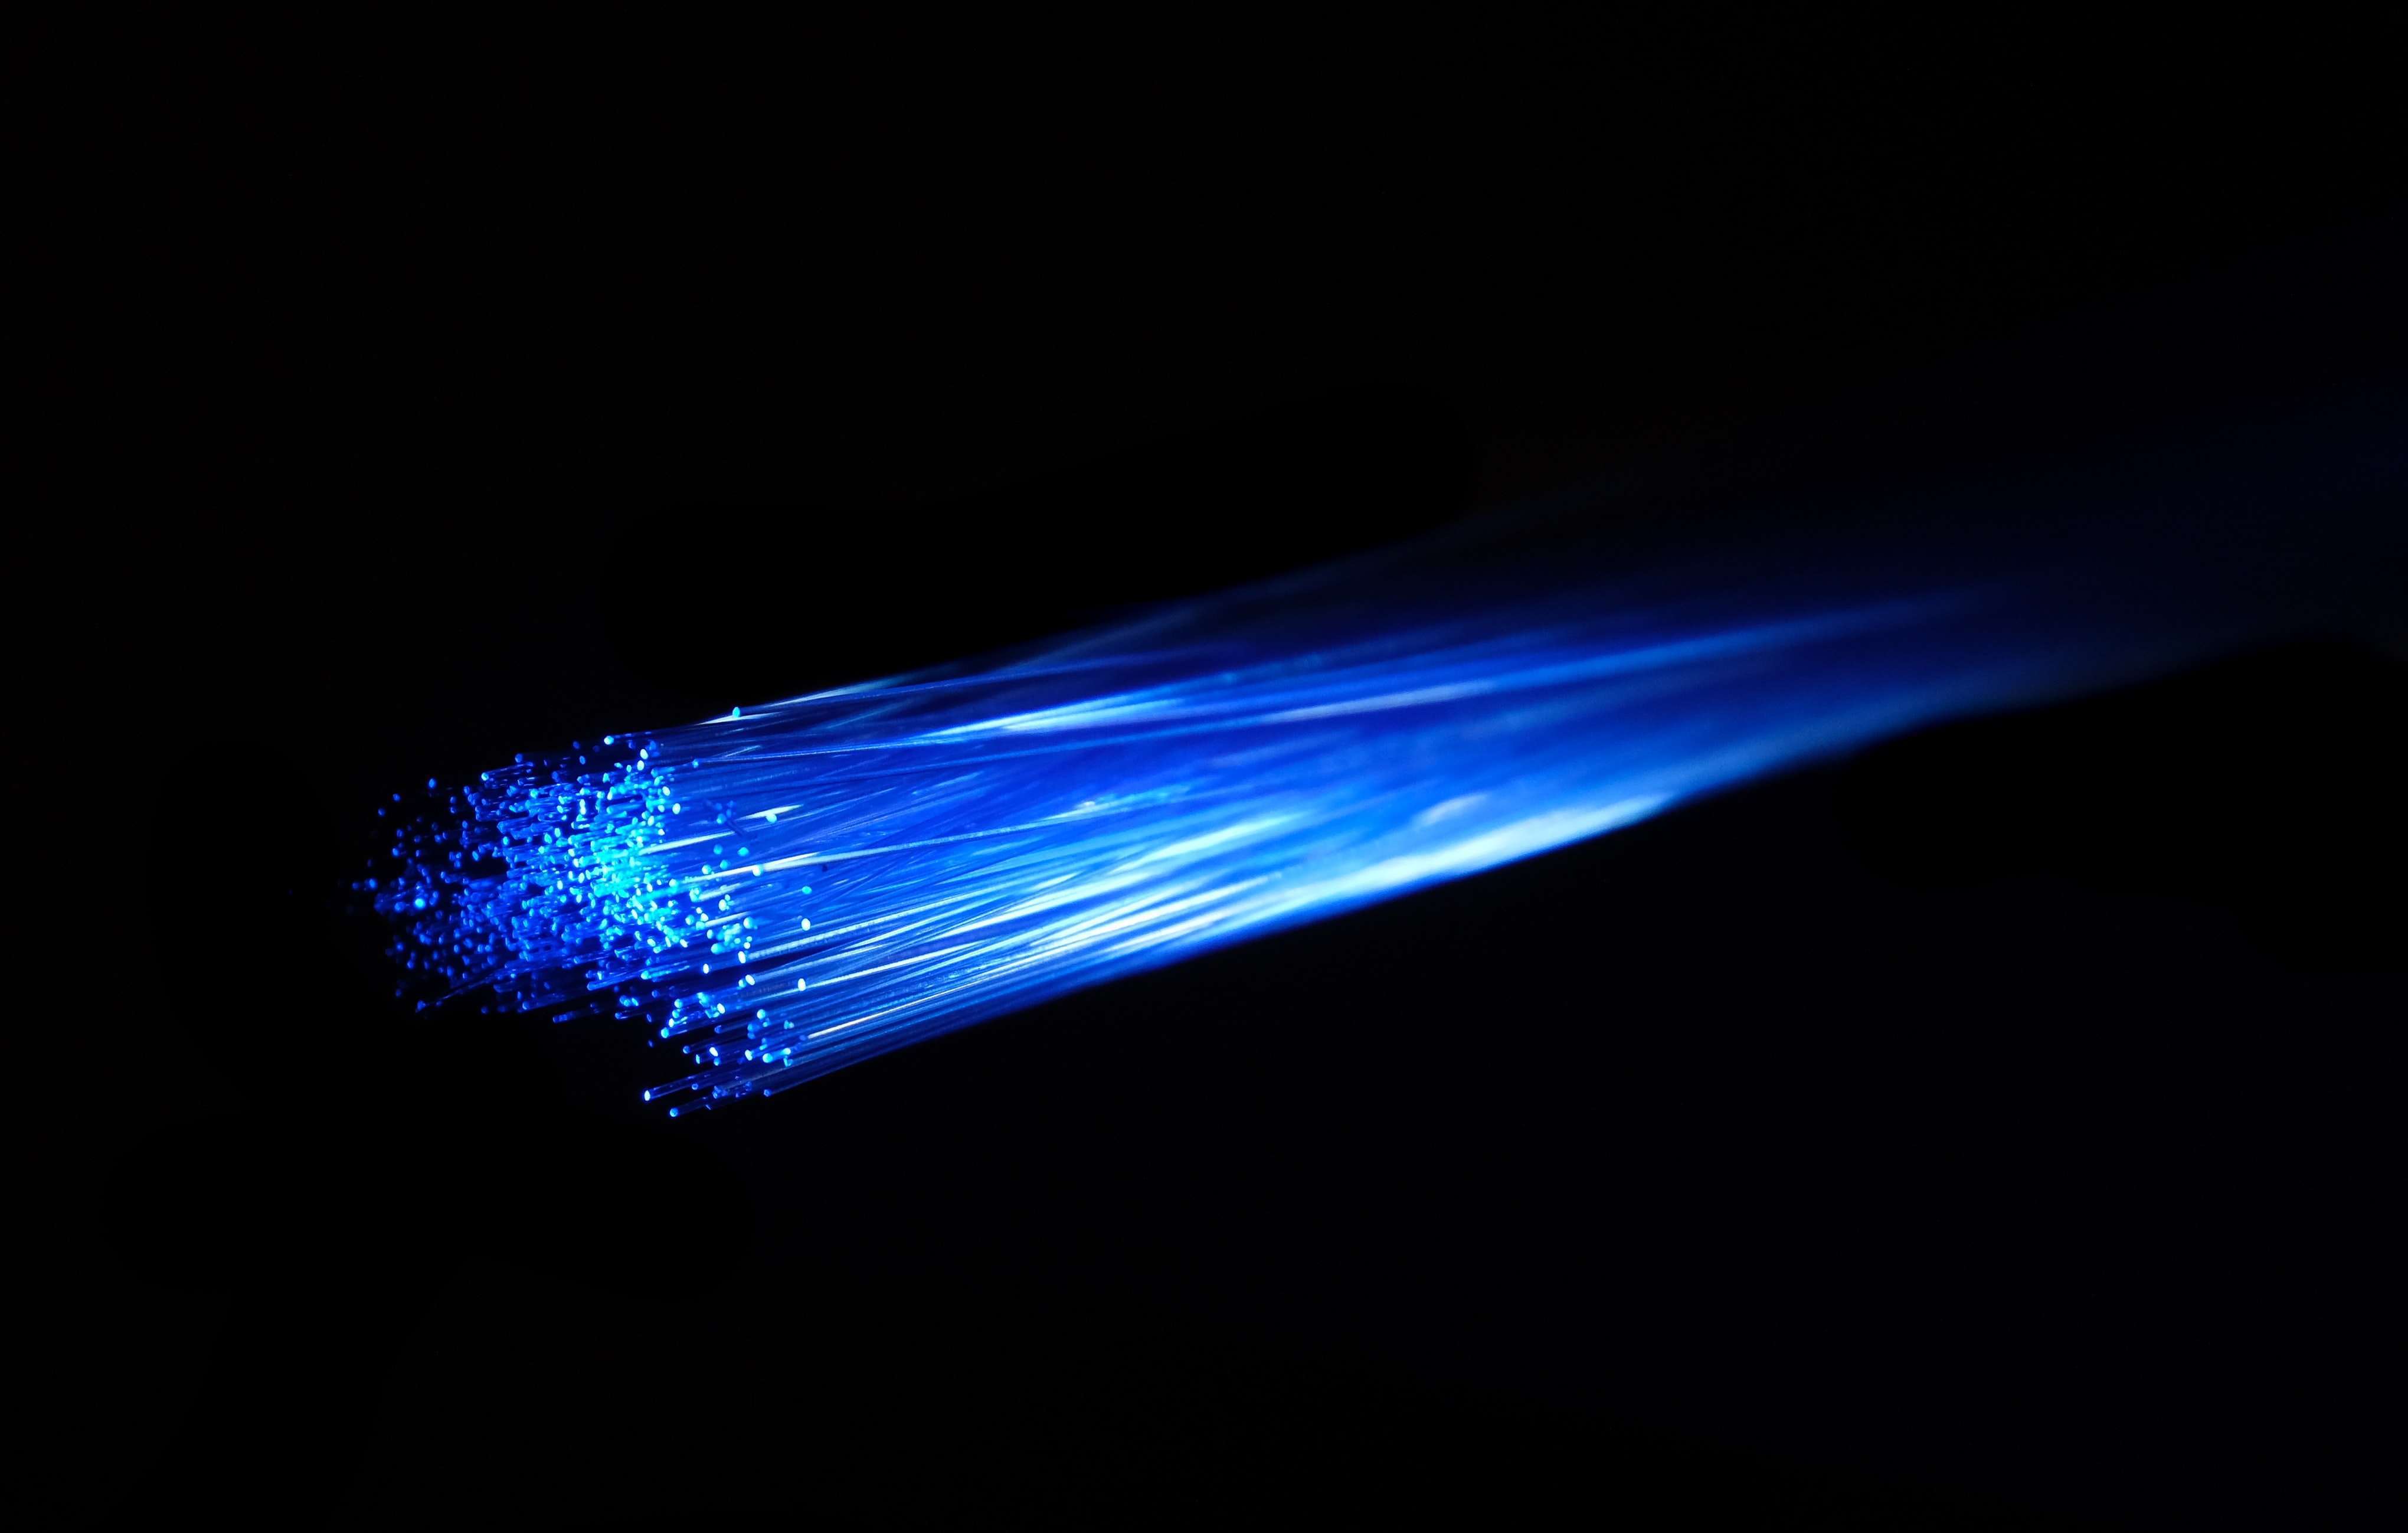 Close up of a fibre optic cable - Picture by www.amvia.co.uk